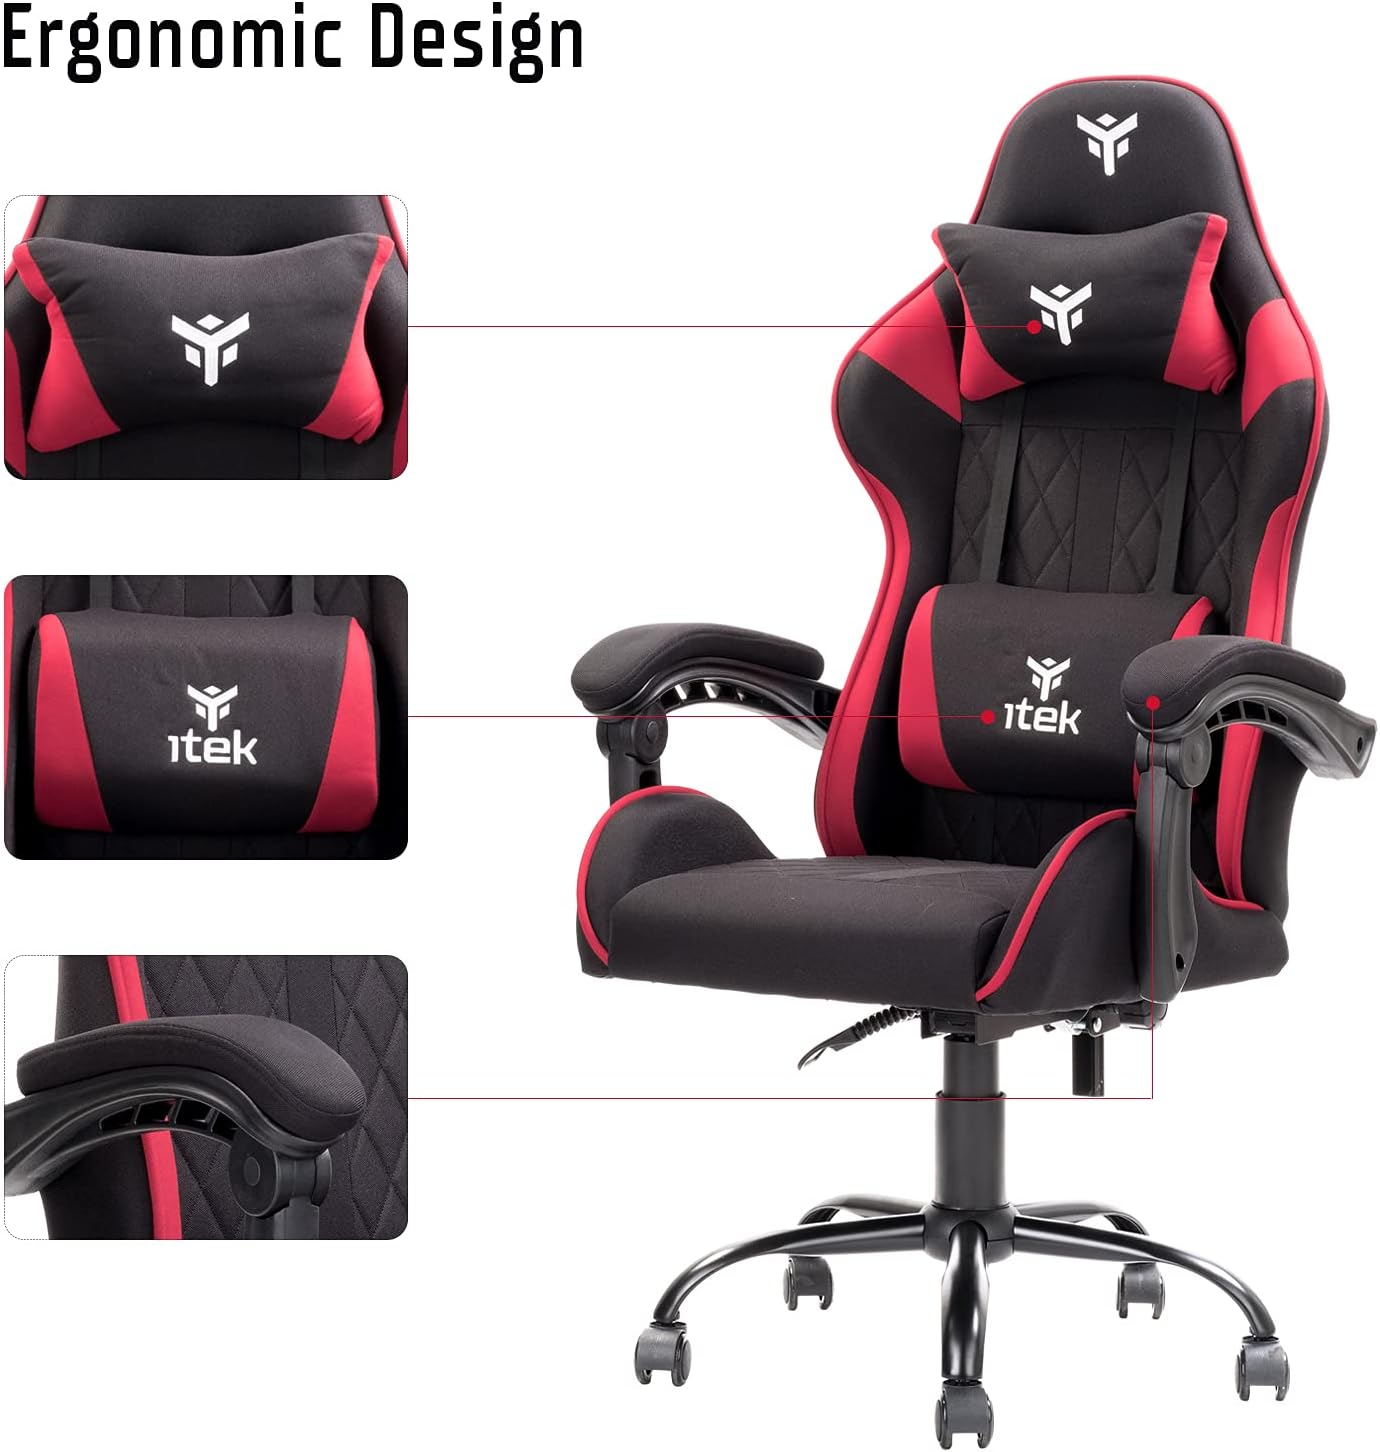 ITEK BLACK/RED GAMING SEAT IN FABRIC, RECLINING BACKREST, DOUBLE CUSHION, Gaming Chair RHOMBUS FF10 